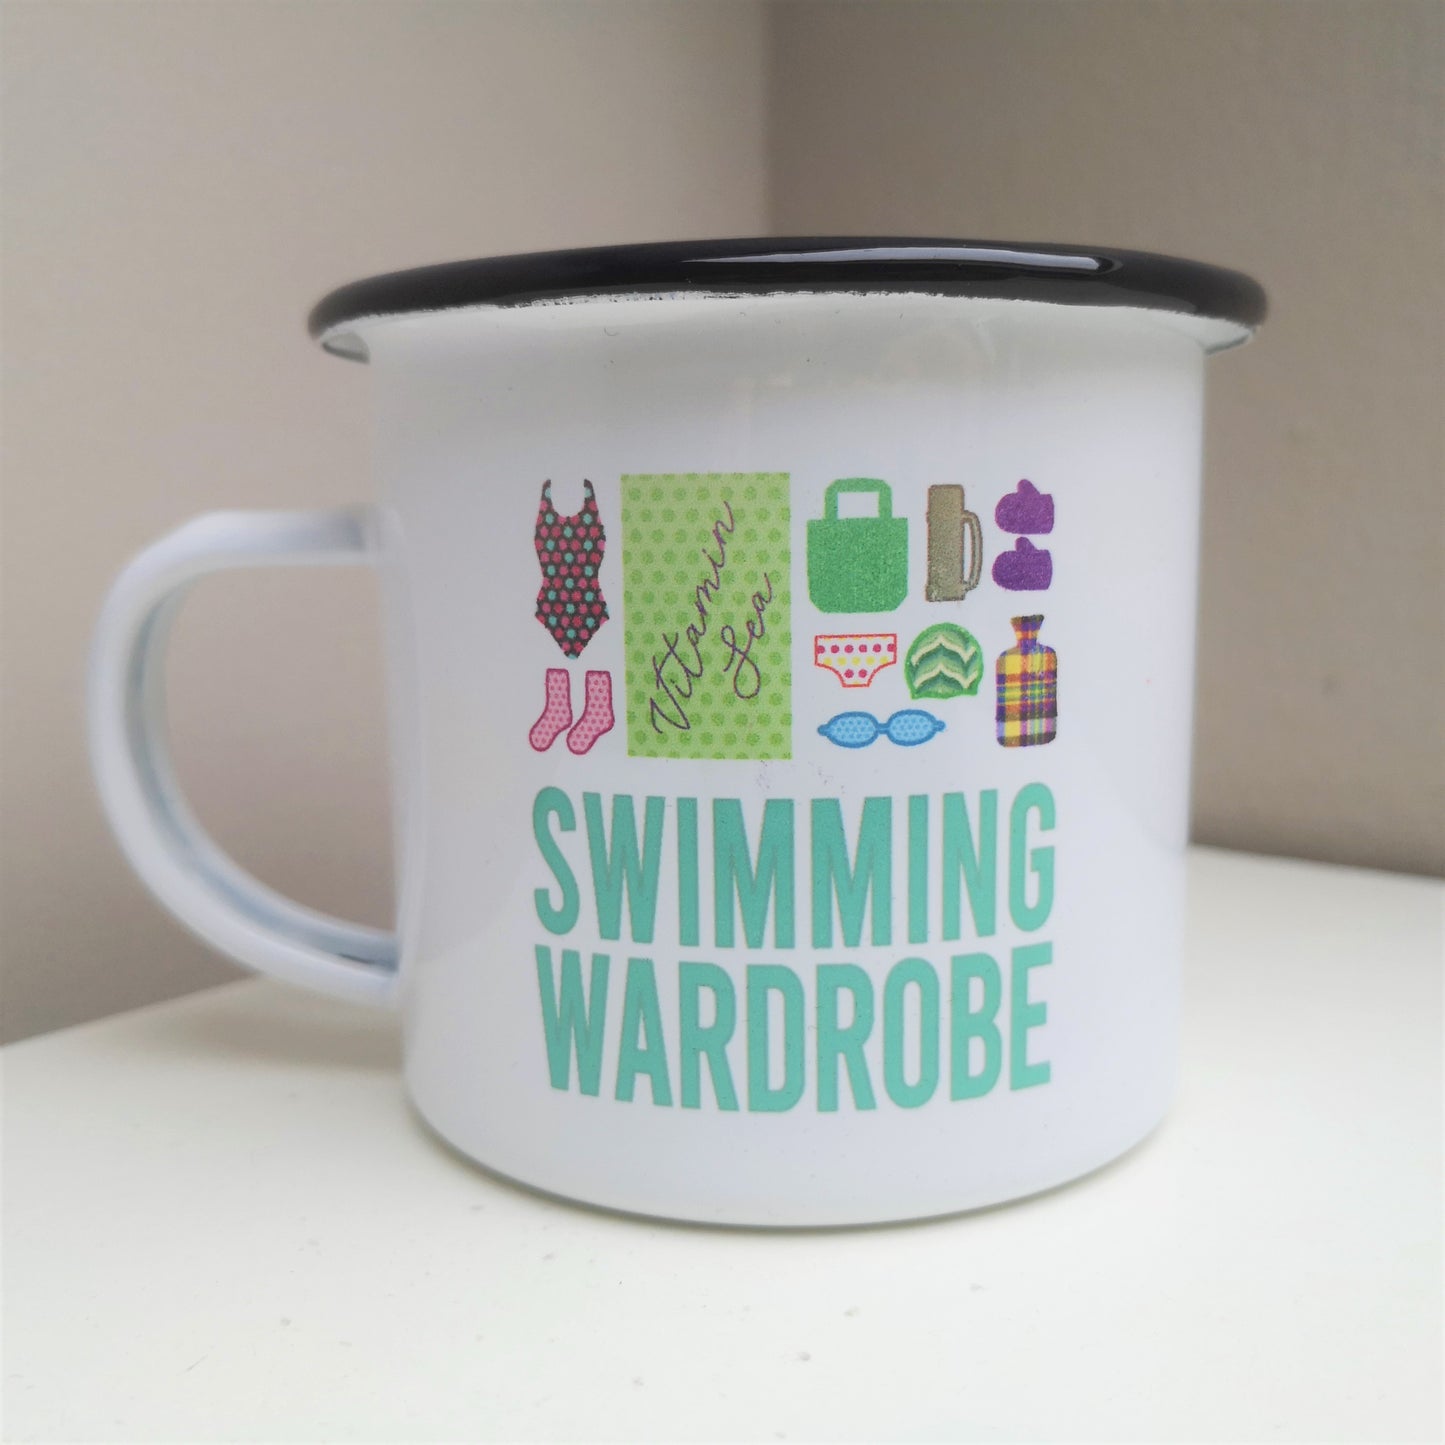 A White enamel mug with a black rim with the following on the front - a mini swimming wardrobe of togs, booties, towel, bag, pants, goggles, swimming cap, flask, gloves and hot water bottle